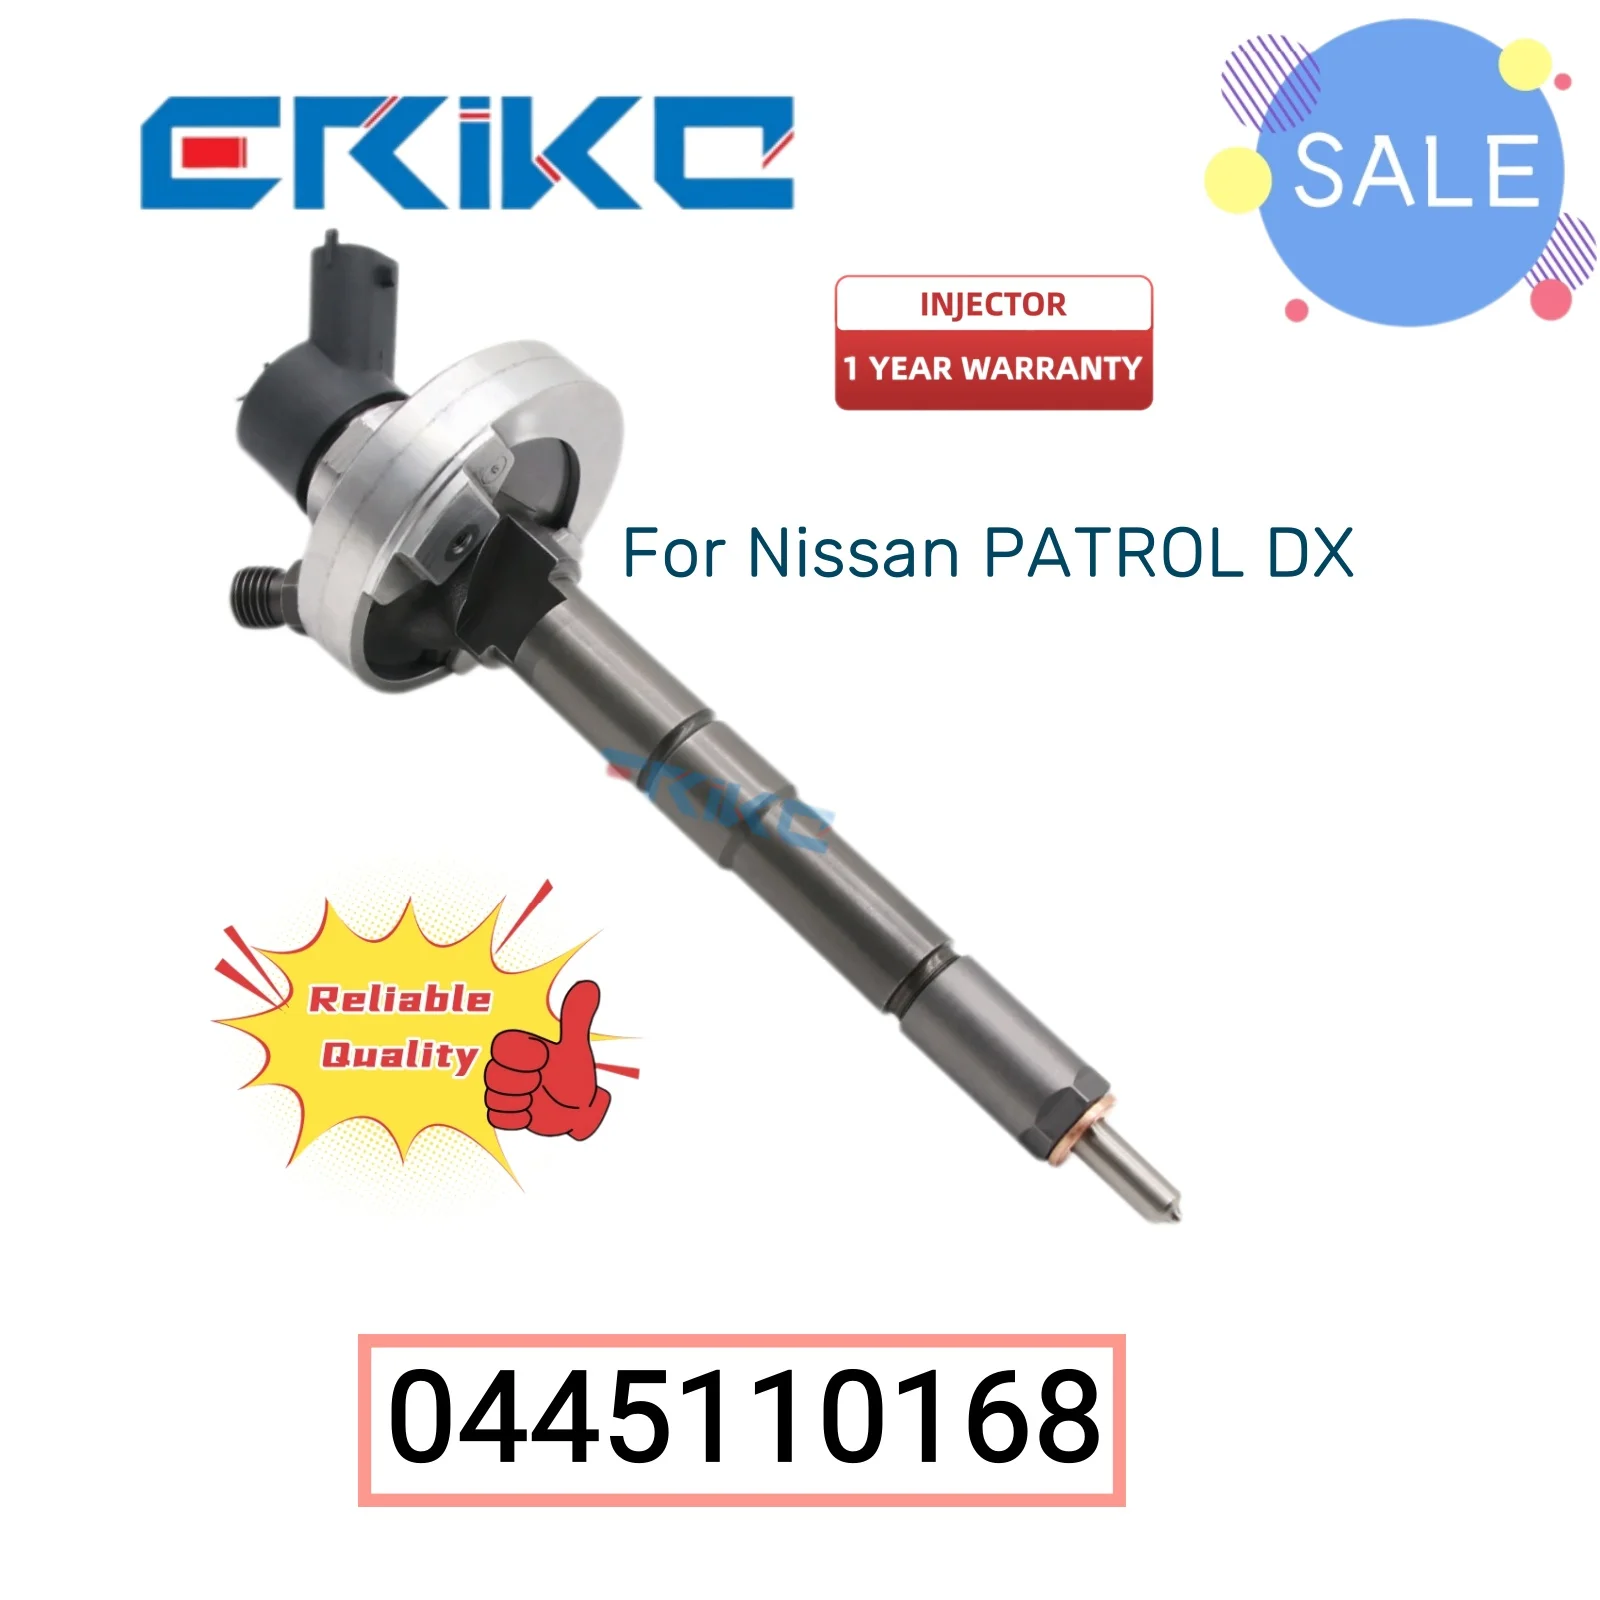 

0445110168 Fuel Diesel Injector 0 445 110 168 Common Rail Injector 0445 110 168 Engine Injector for Nissan PATROL DX RENAULT